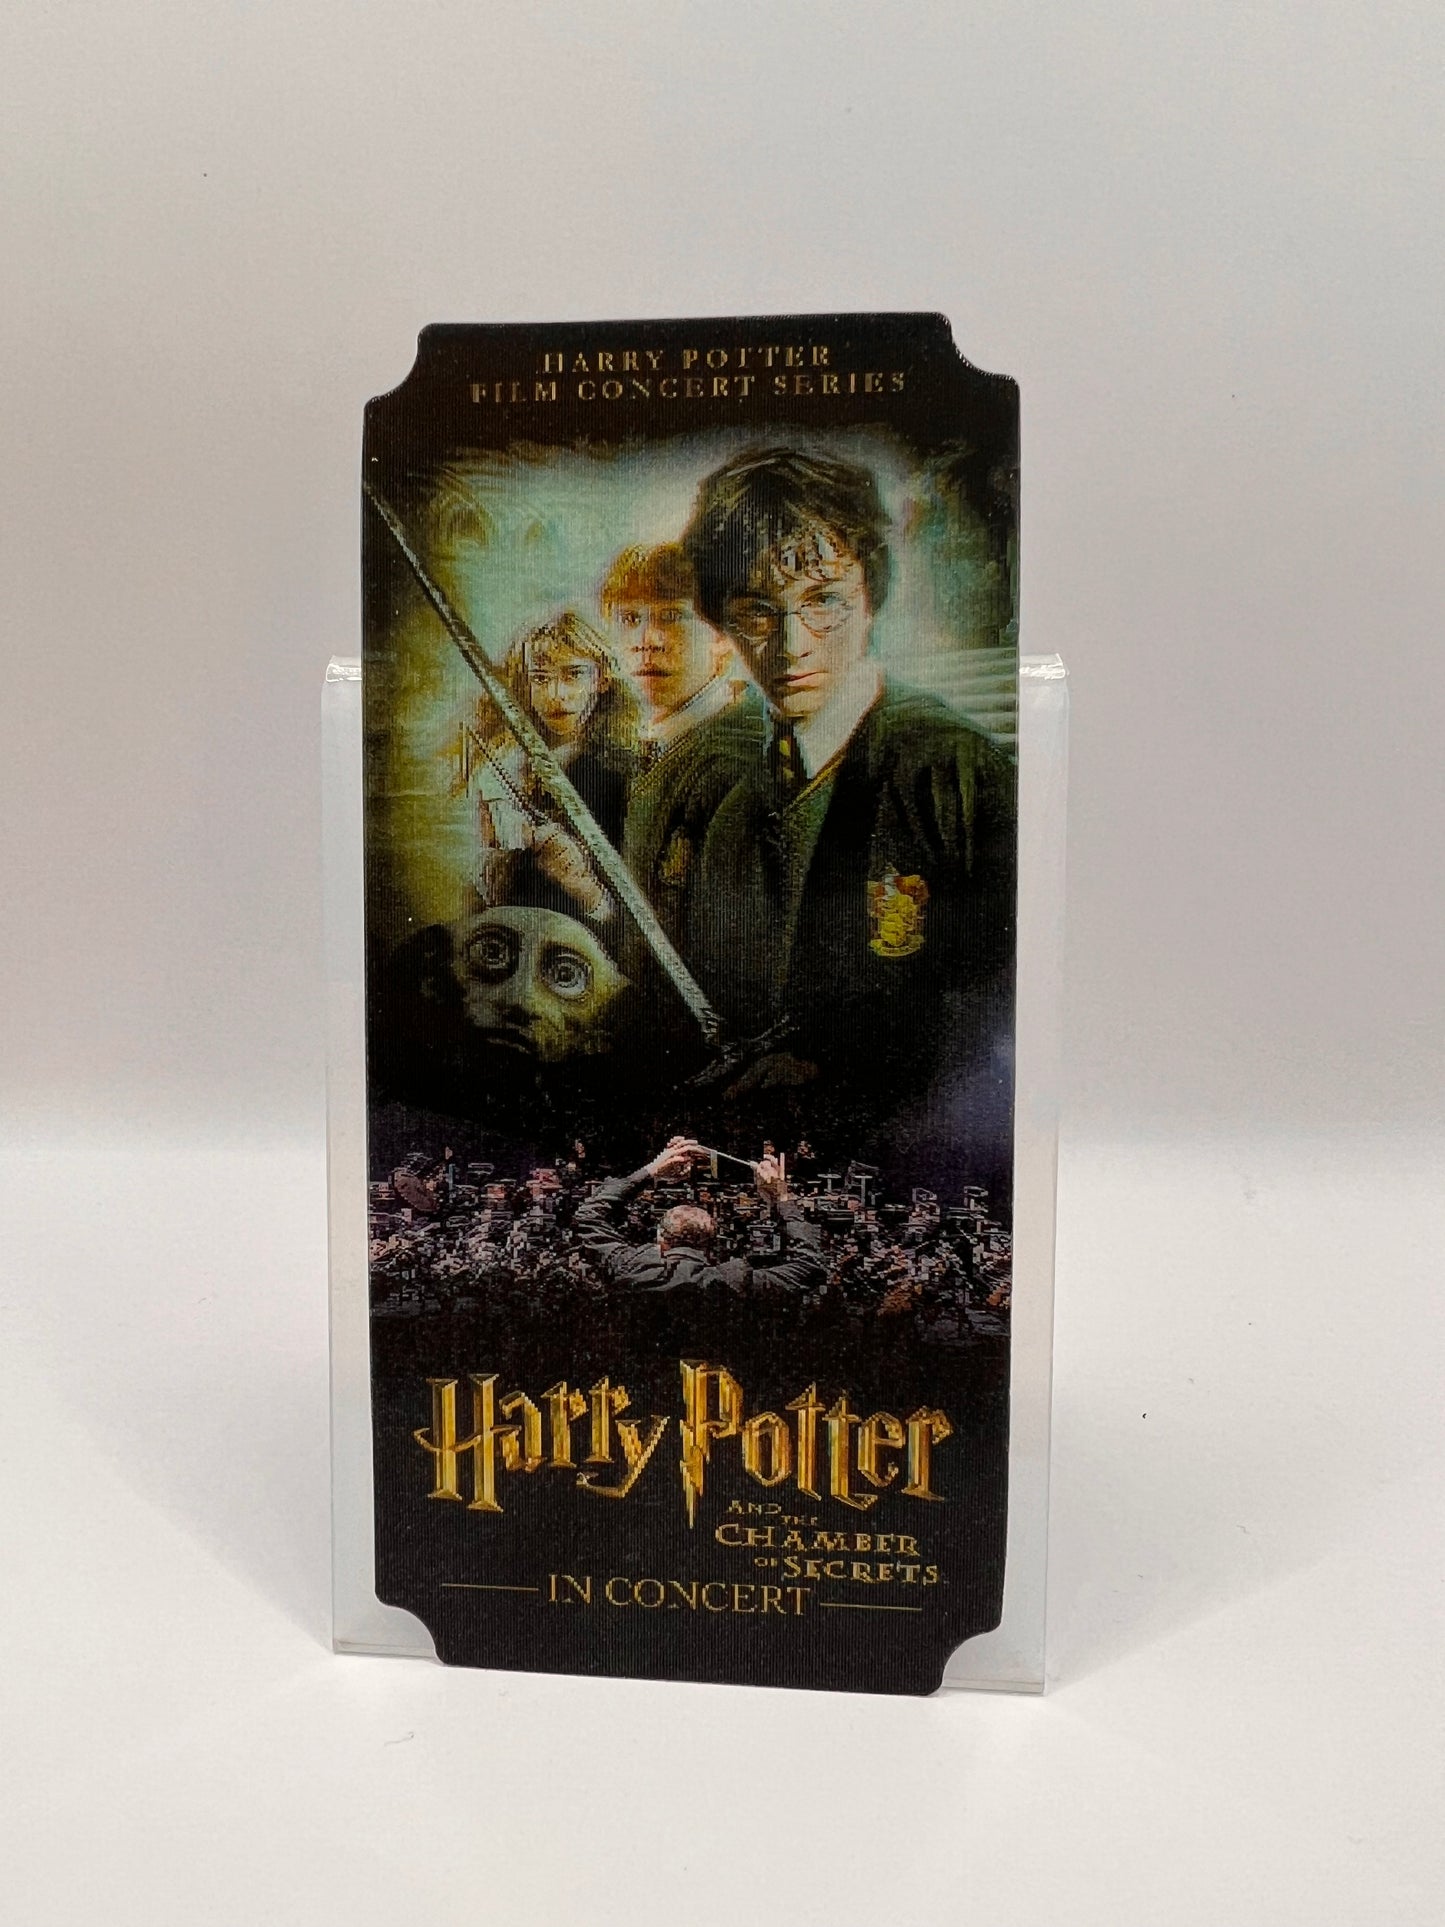 Harry Potter and the Chamber of Secrets™ in Concert Souvenir Ticket